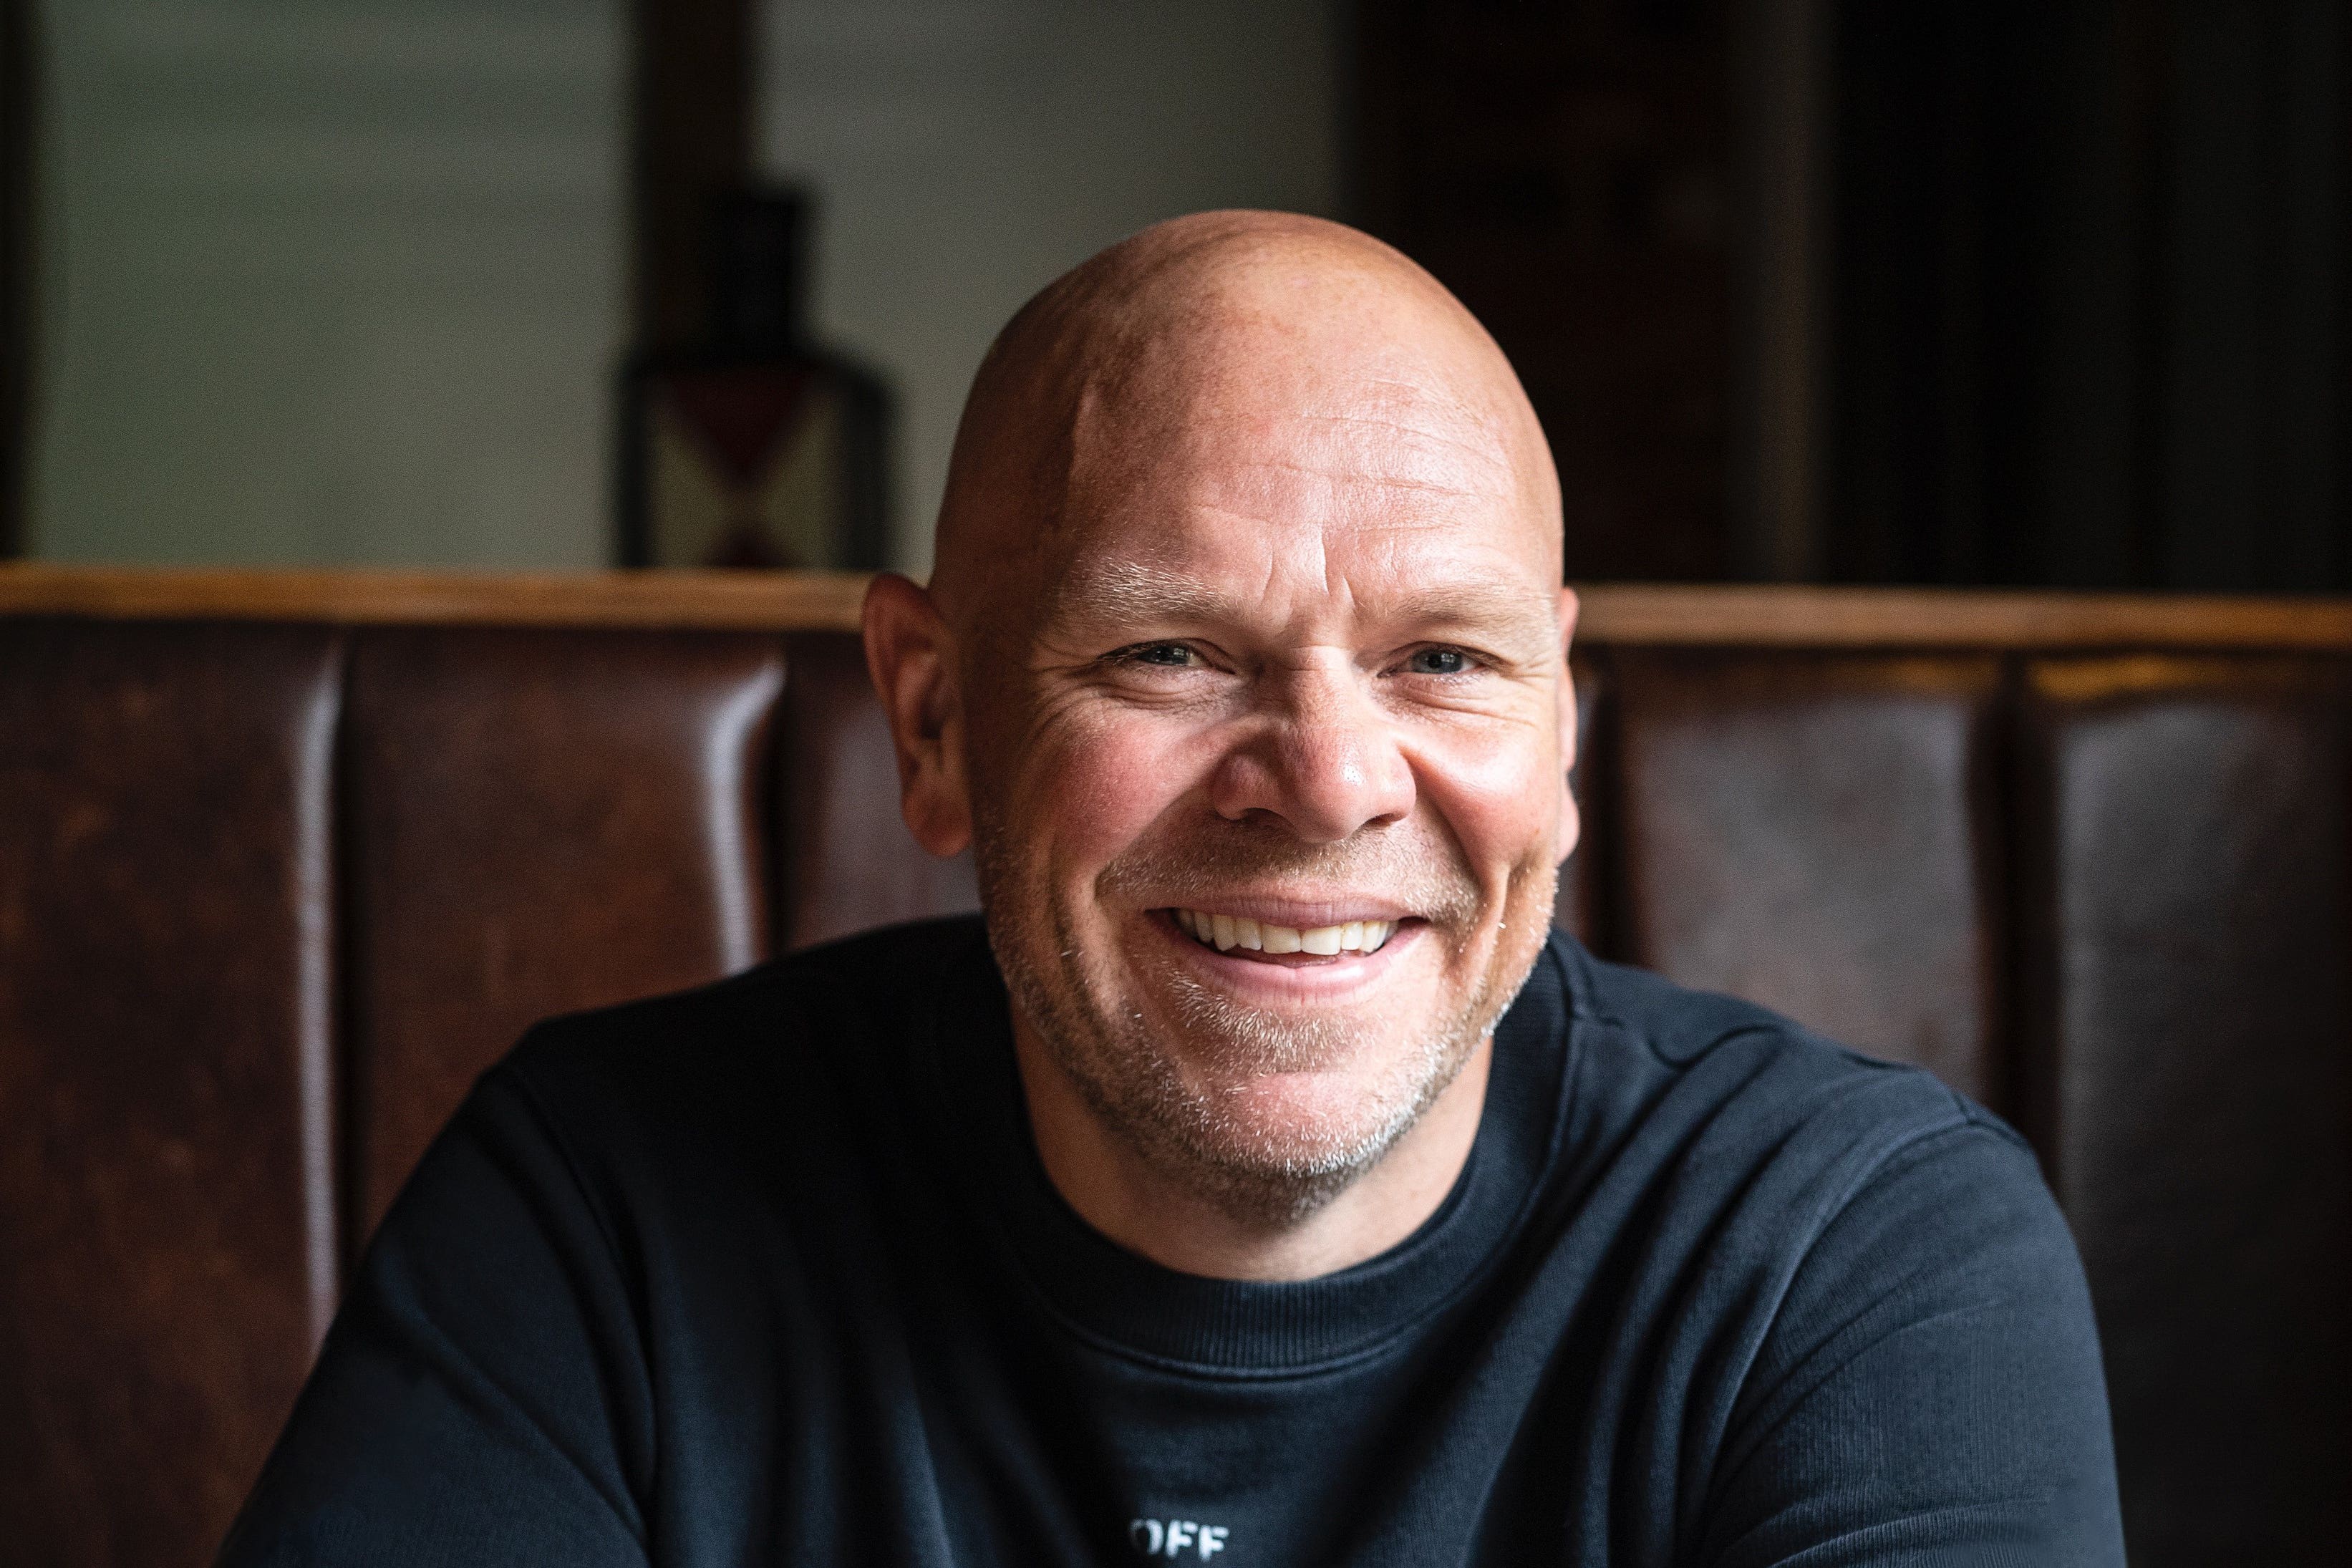 Tom Kerridge defended his £35 charge for fish and chips at his Harrods restaurant